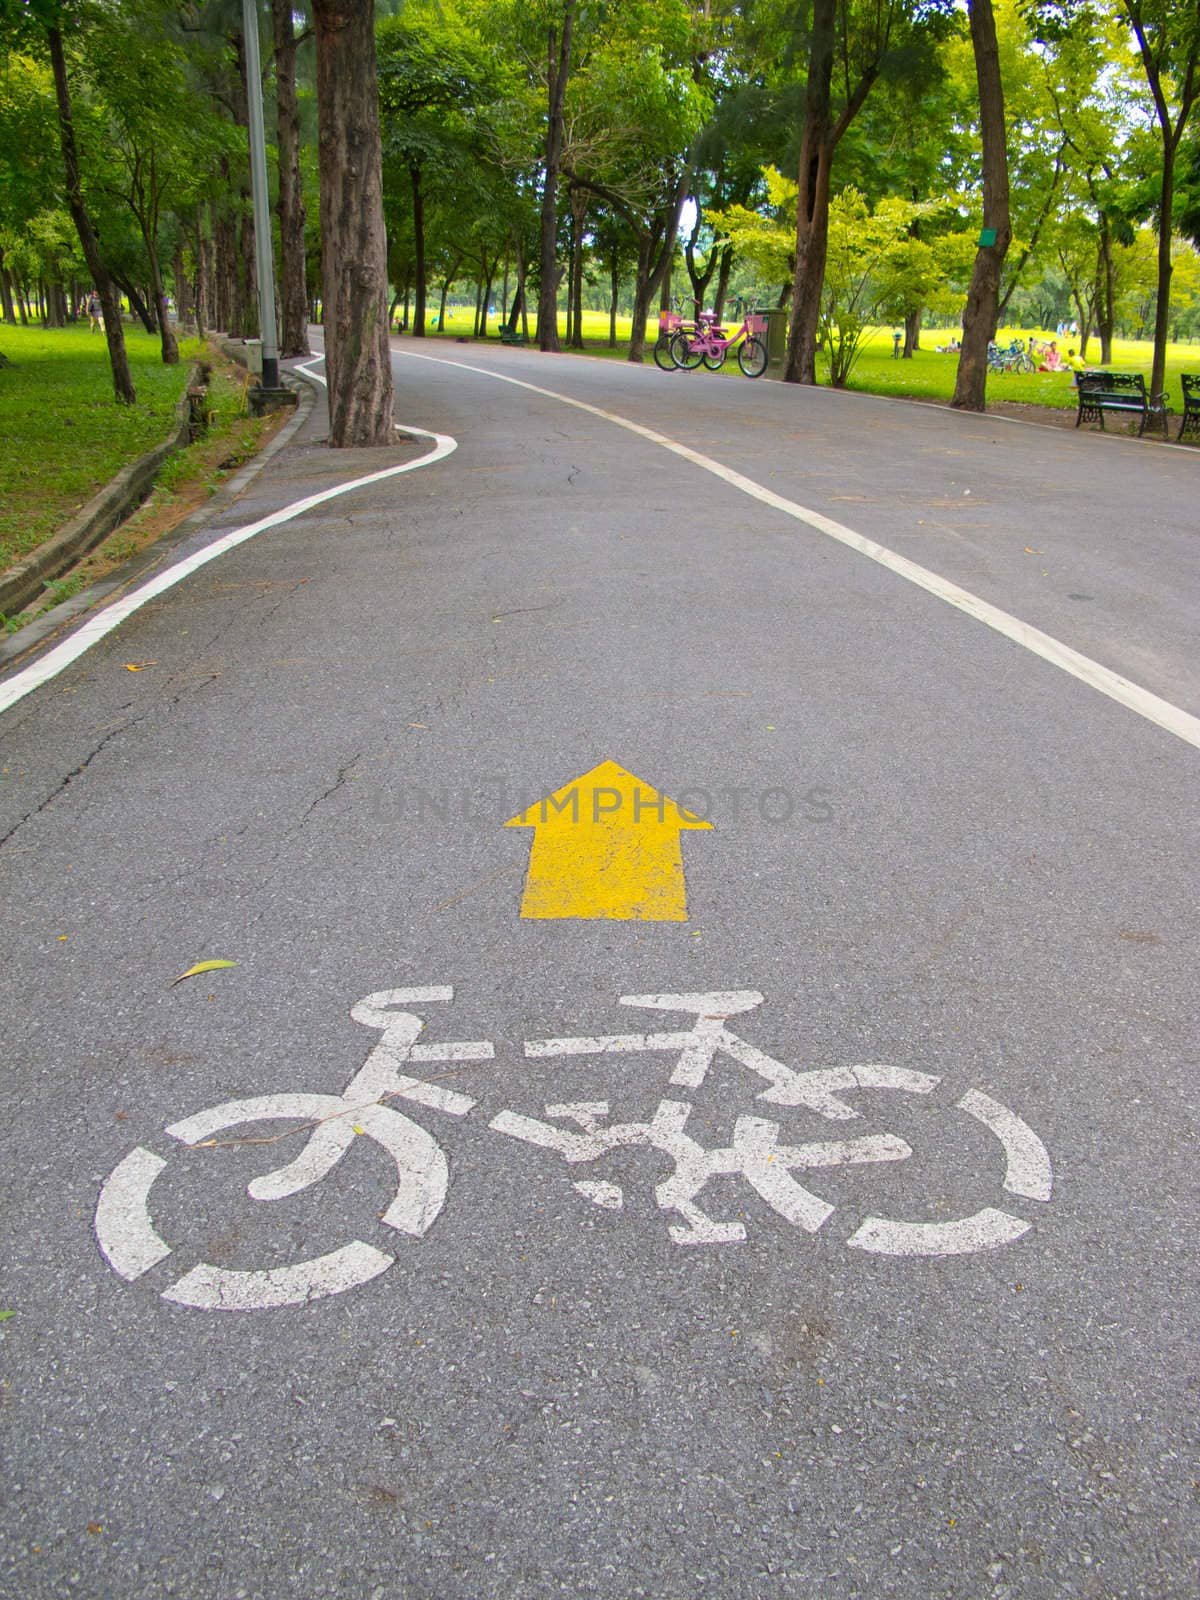 The direction for bicycle in the park.